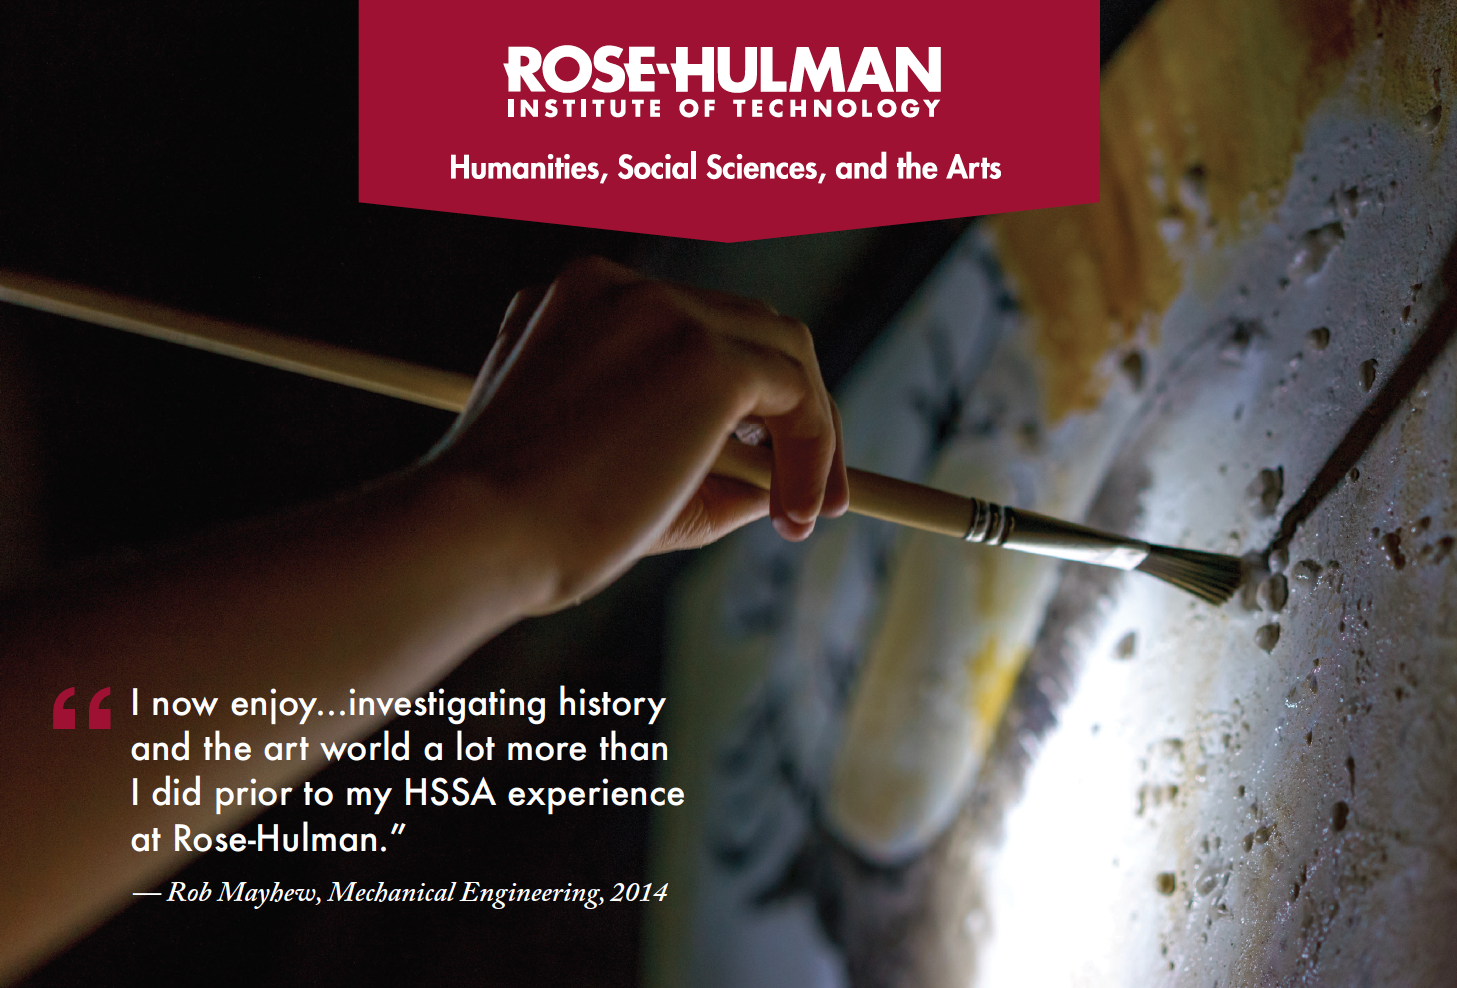 Marketing collateral for the Dept of Humanities, Social Sciences, and the Arts at Rose-Hulman Institute of Technology